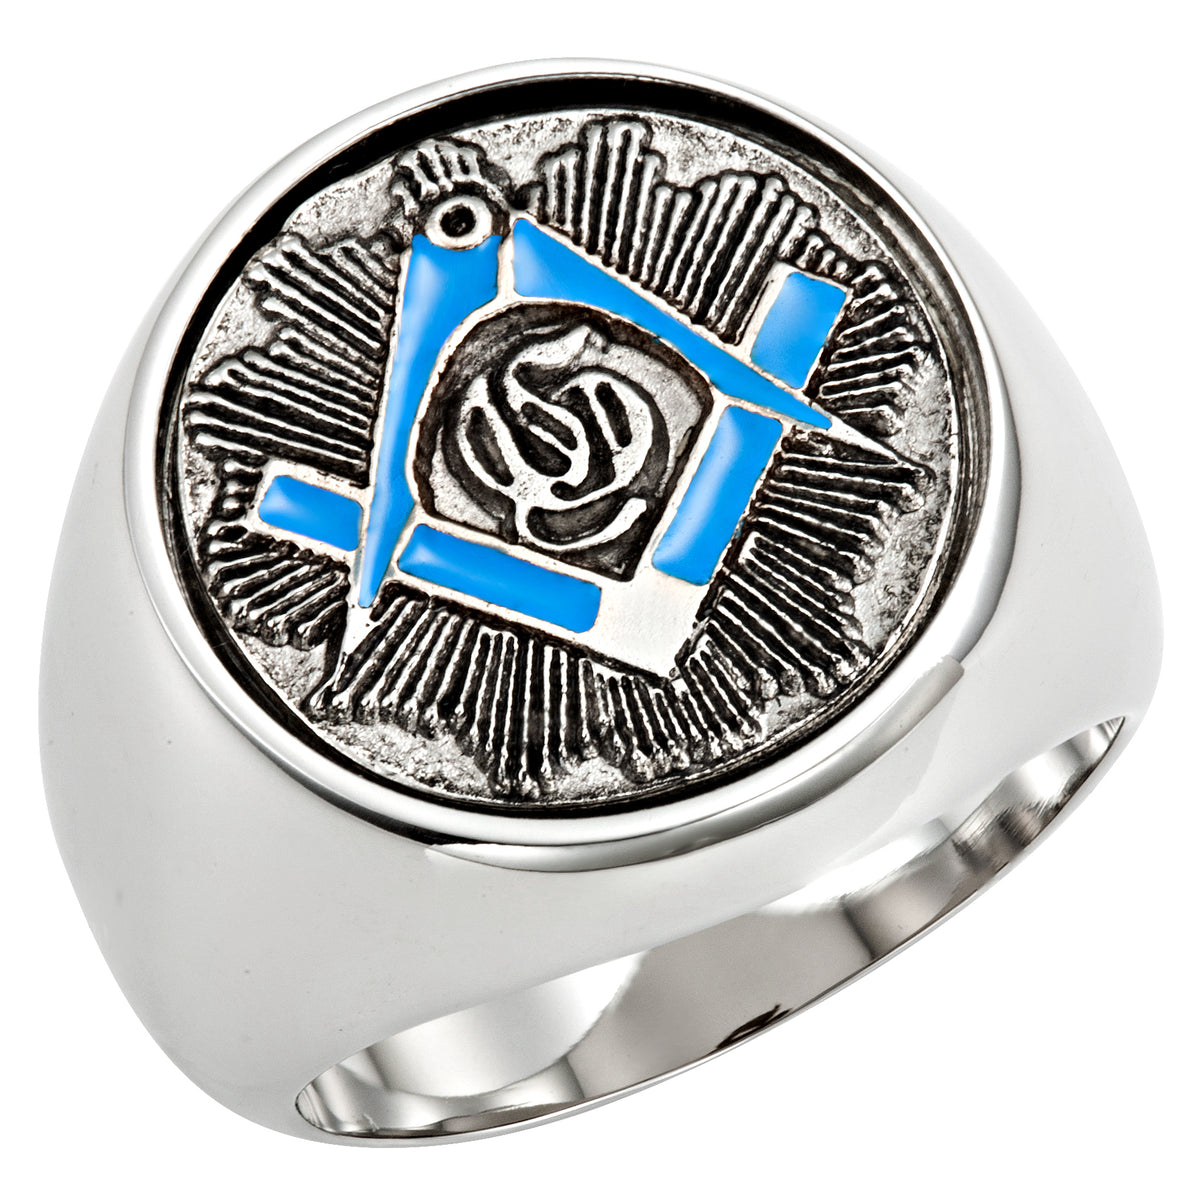 Stainless Steel Masonic Ring with Blue Square and Compass in Gift Pouch